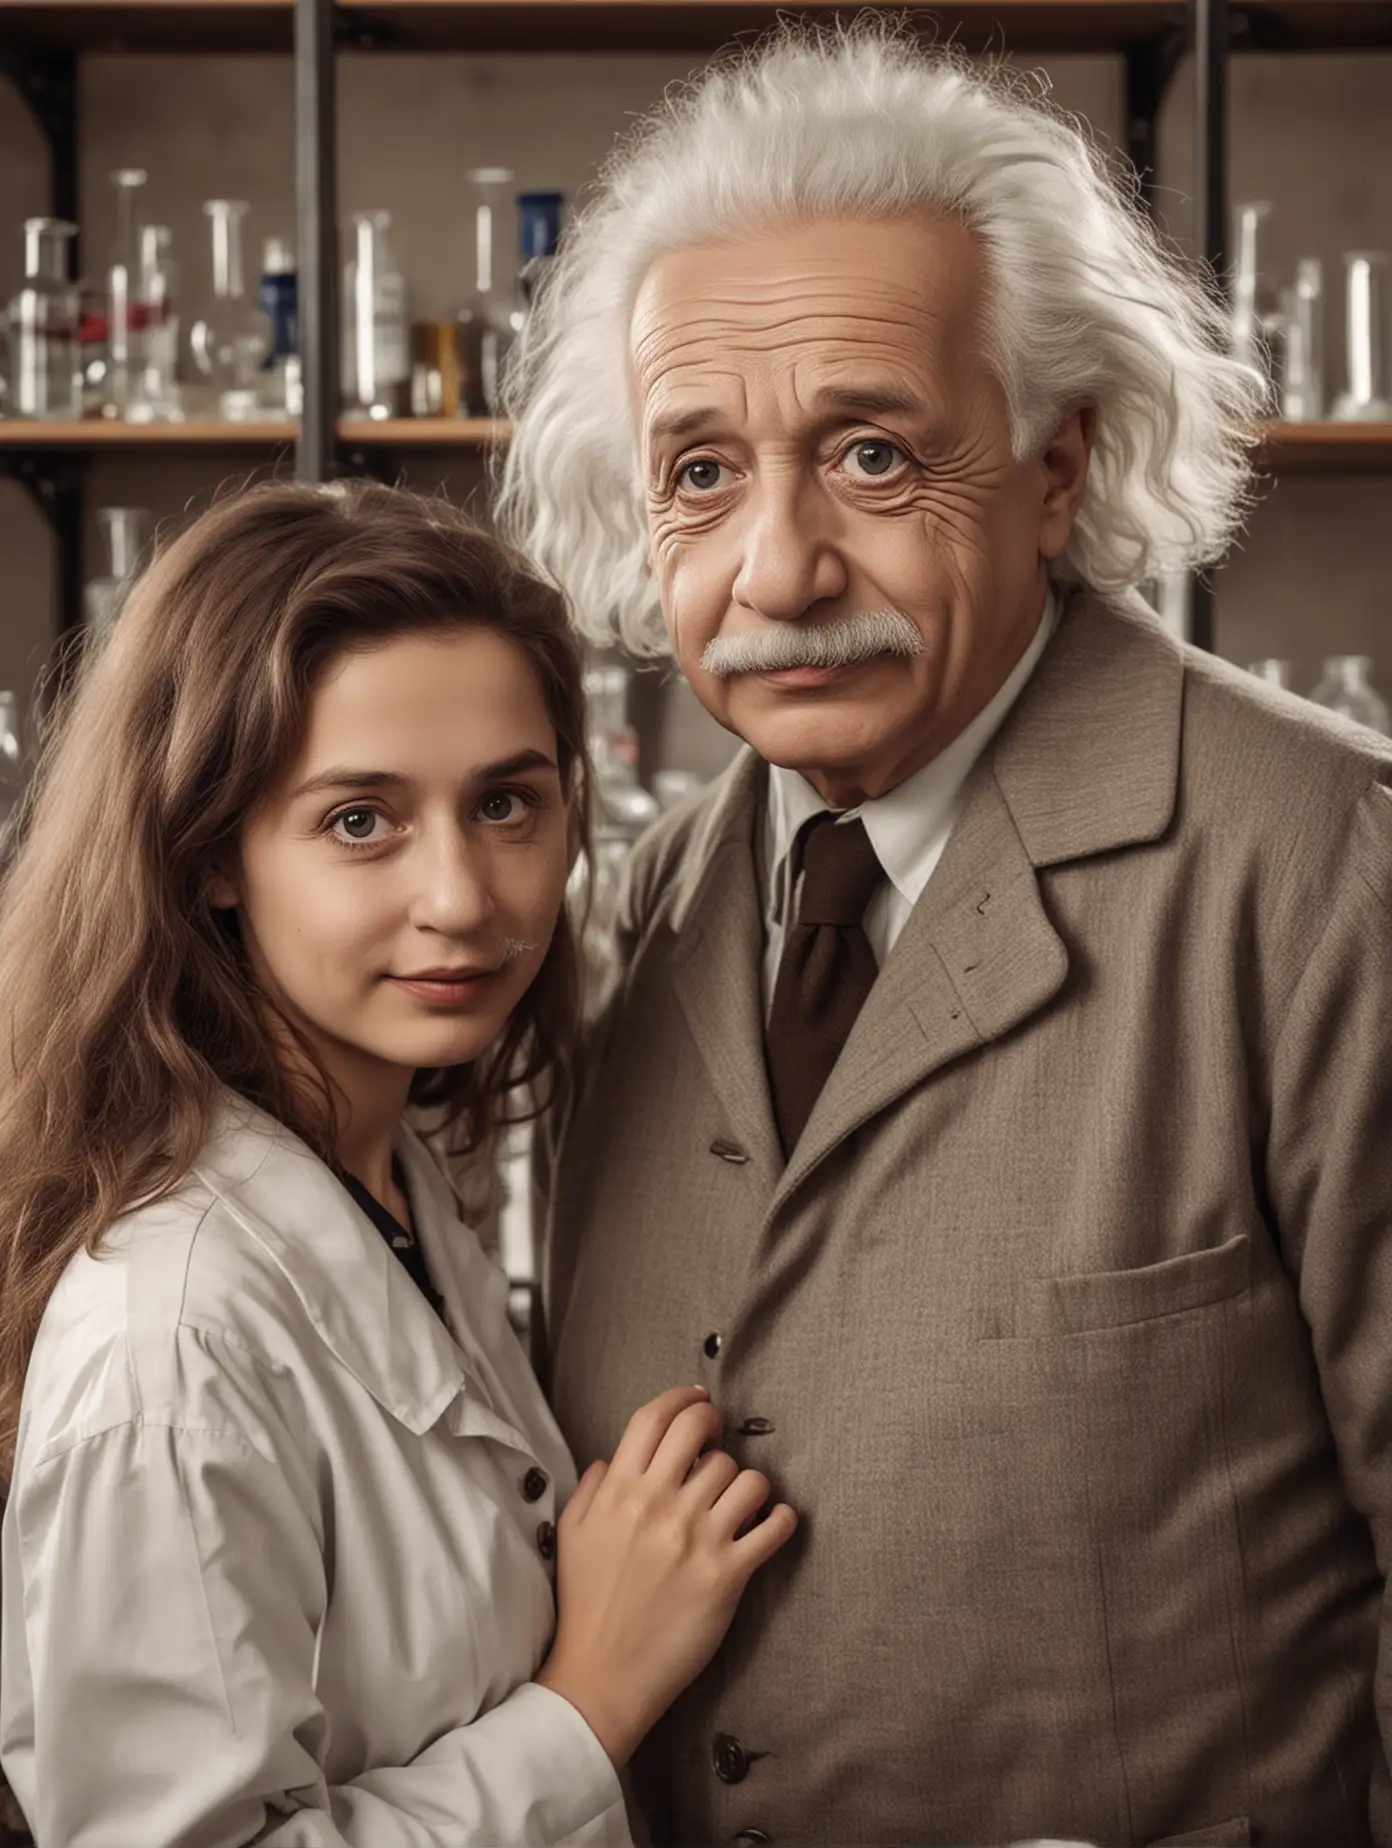 A beautiful woman takes a photo with Einstein in the laboratory